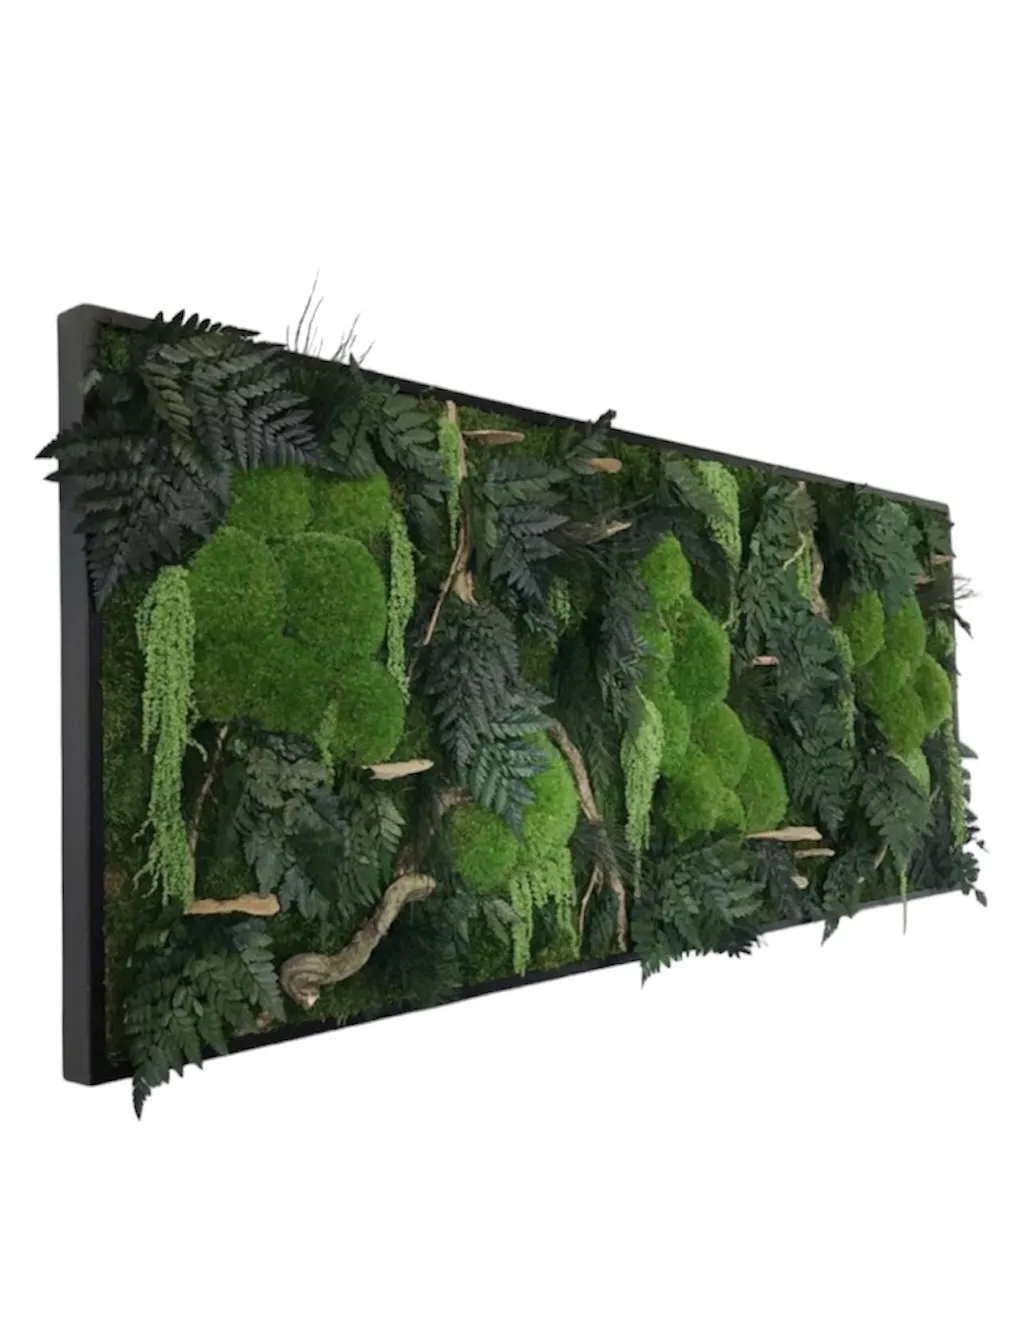 Decor Moss painting with Wood and plants